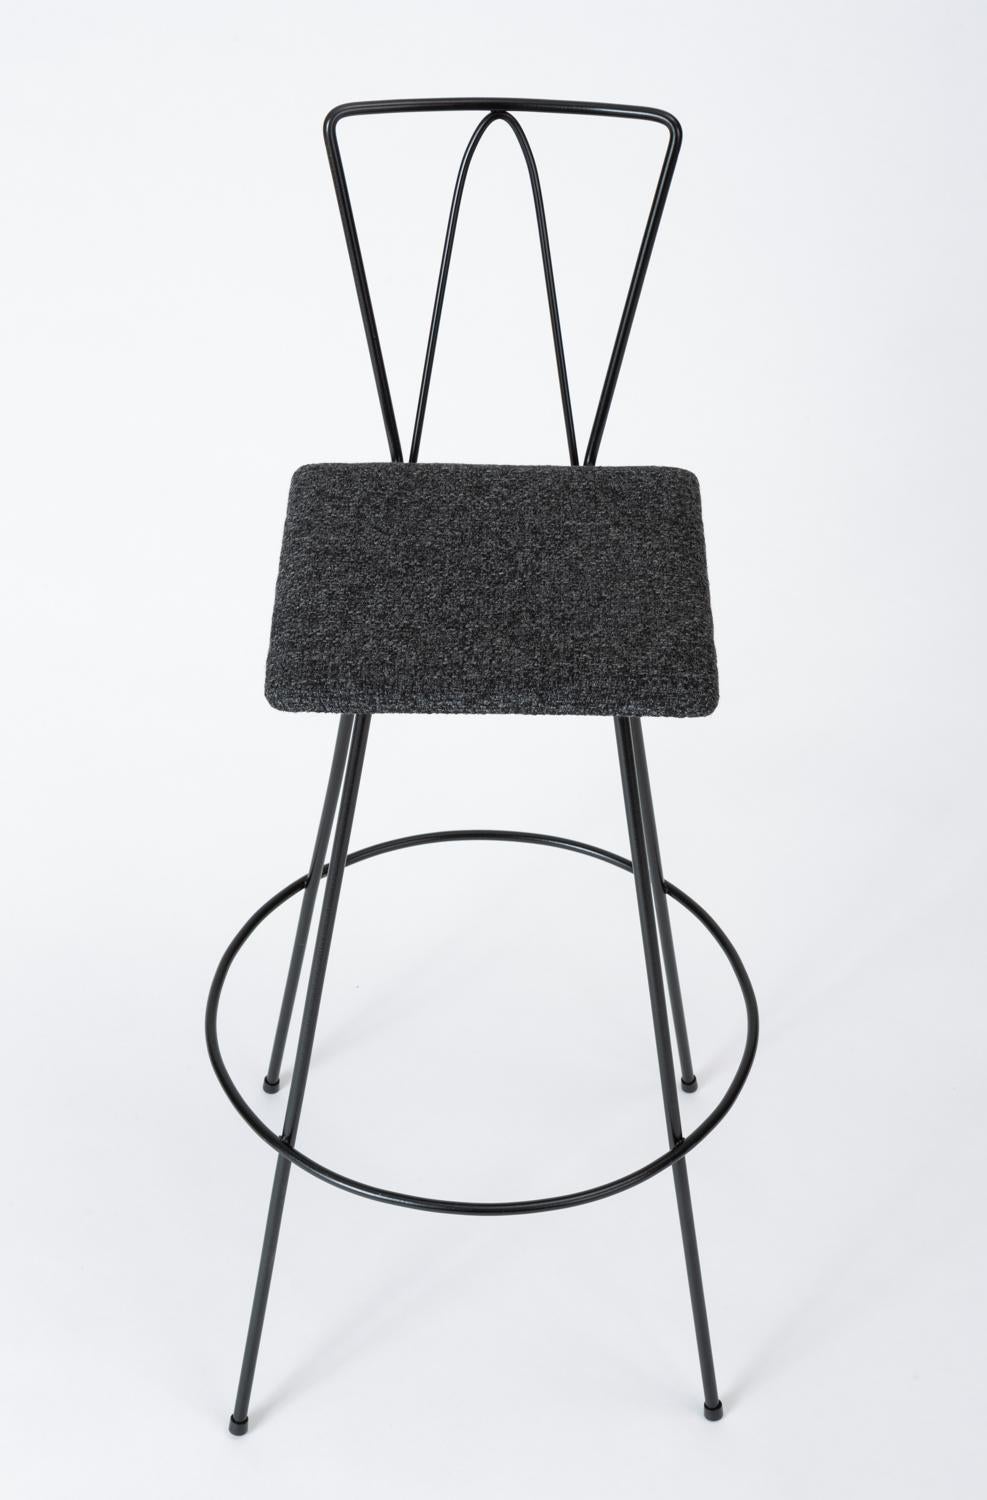 A modernist bar stool with a slender profile in bent, powder-coated metal. The stool has four angled legs, encircled by a support bar and footrest. The feet are capped with rubber tips to protect surfaces. The square seat is upholstered in a dark